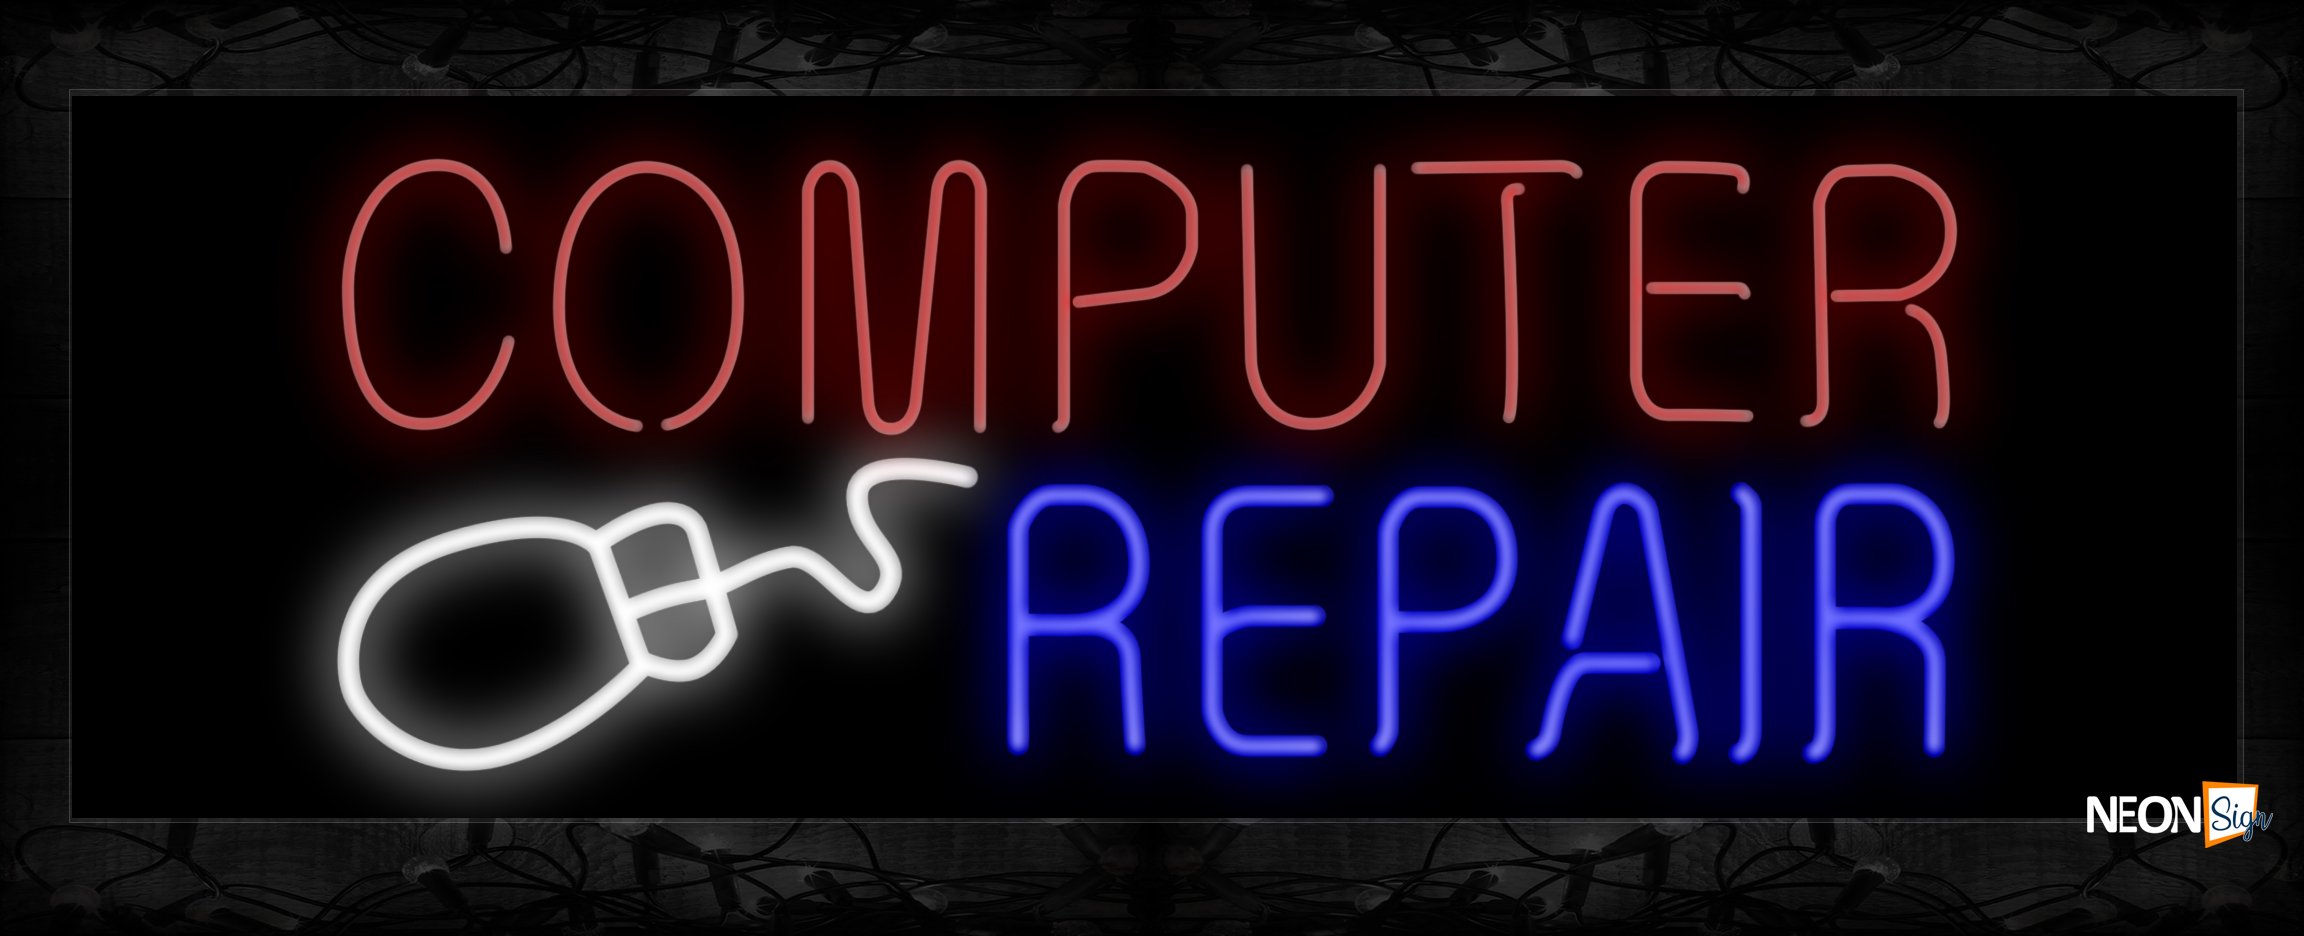 Image of 10477 Computer Repair with mouse logo Neon Sign 13x32 Black Backing